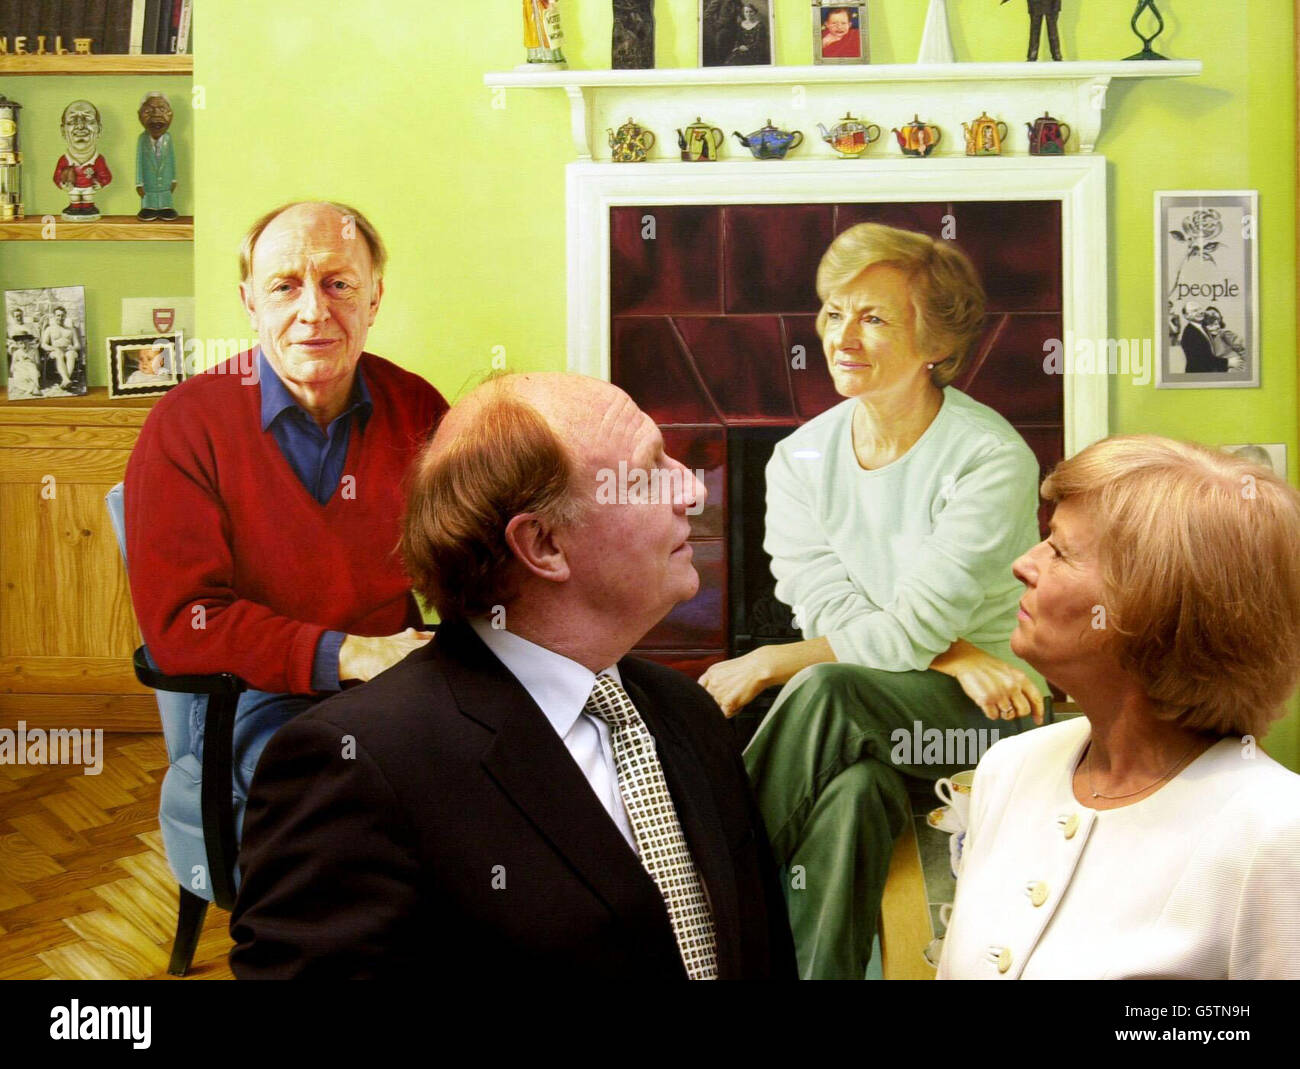 MEP's Neil and Glenys Kinnock, look at a portrait of themselves painted by Andrew Tift, unveiled at London's National Portrait Gallery. The portrait was painted in 6 sittings, one in Brussels and five at the Kinnock's house near Cardiff. Stock Photo